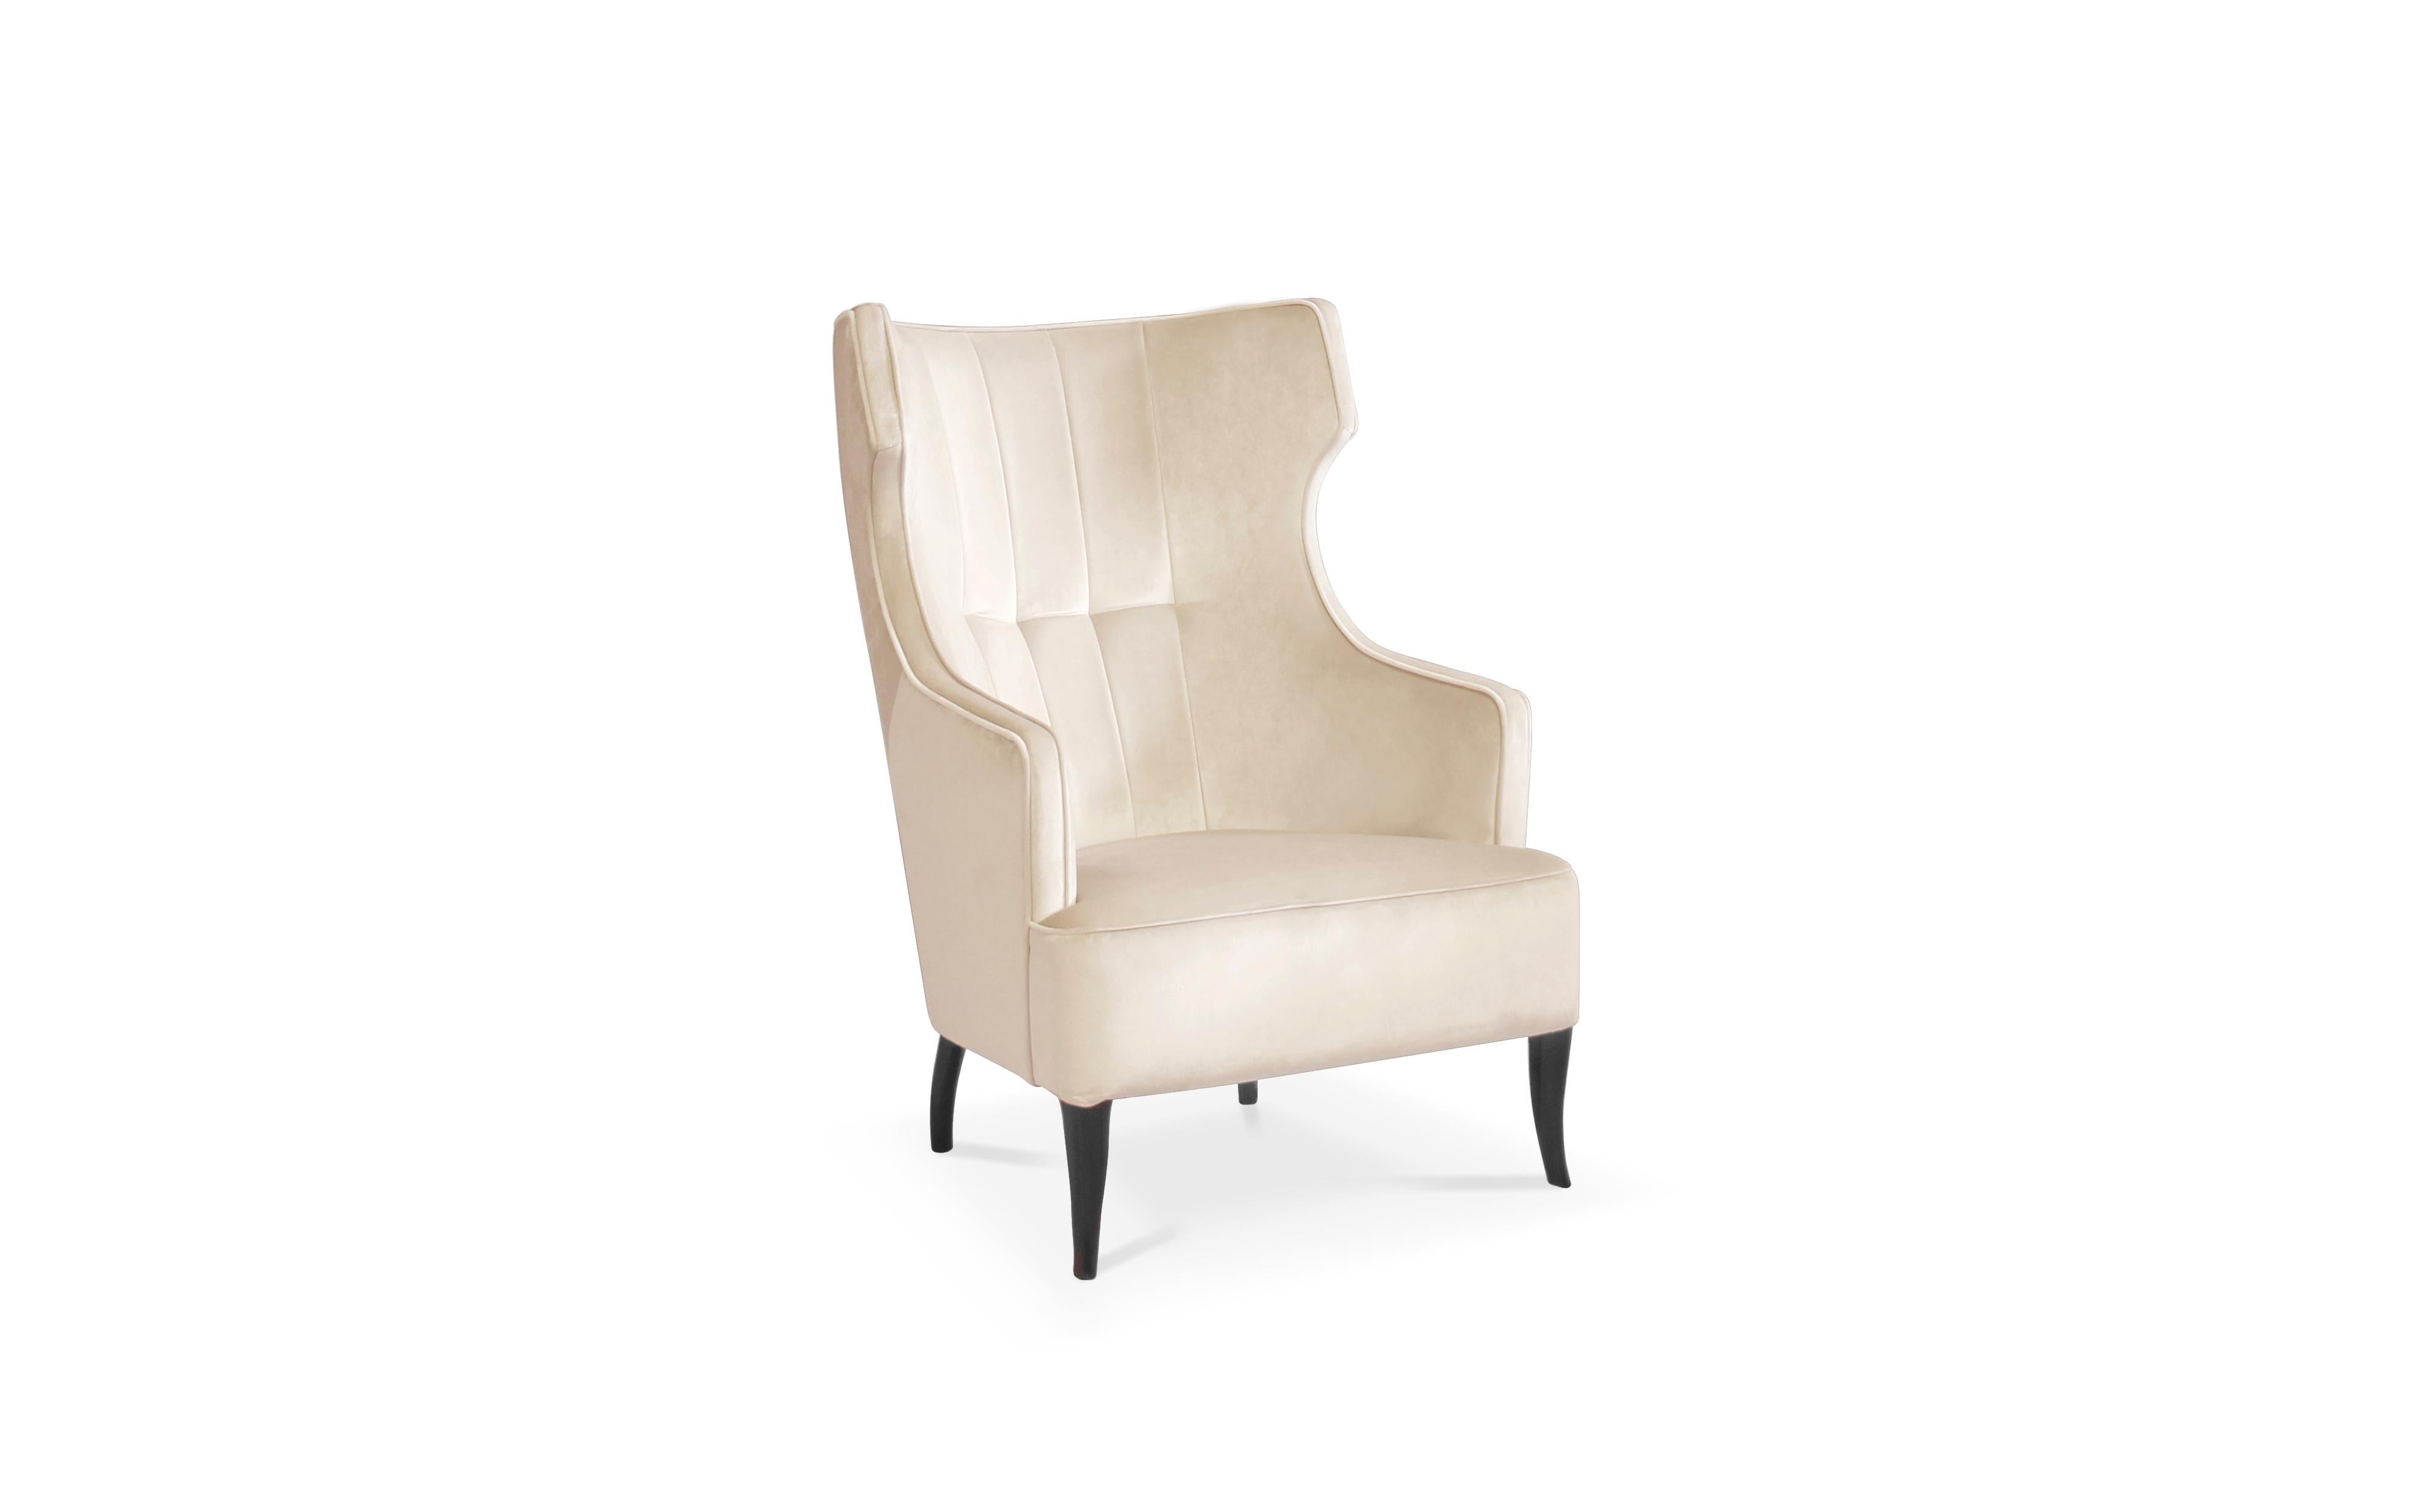 In the border between Argentina and Brazil, there is one of the most striking views in the world - the Iguazu falls. IGUAZU Wing chair perfectly combines the strength of these mesmerizing waterfalls. As a high-back lounge chair, upholstered in